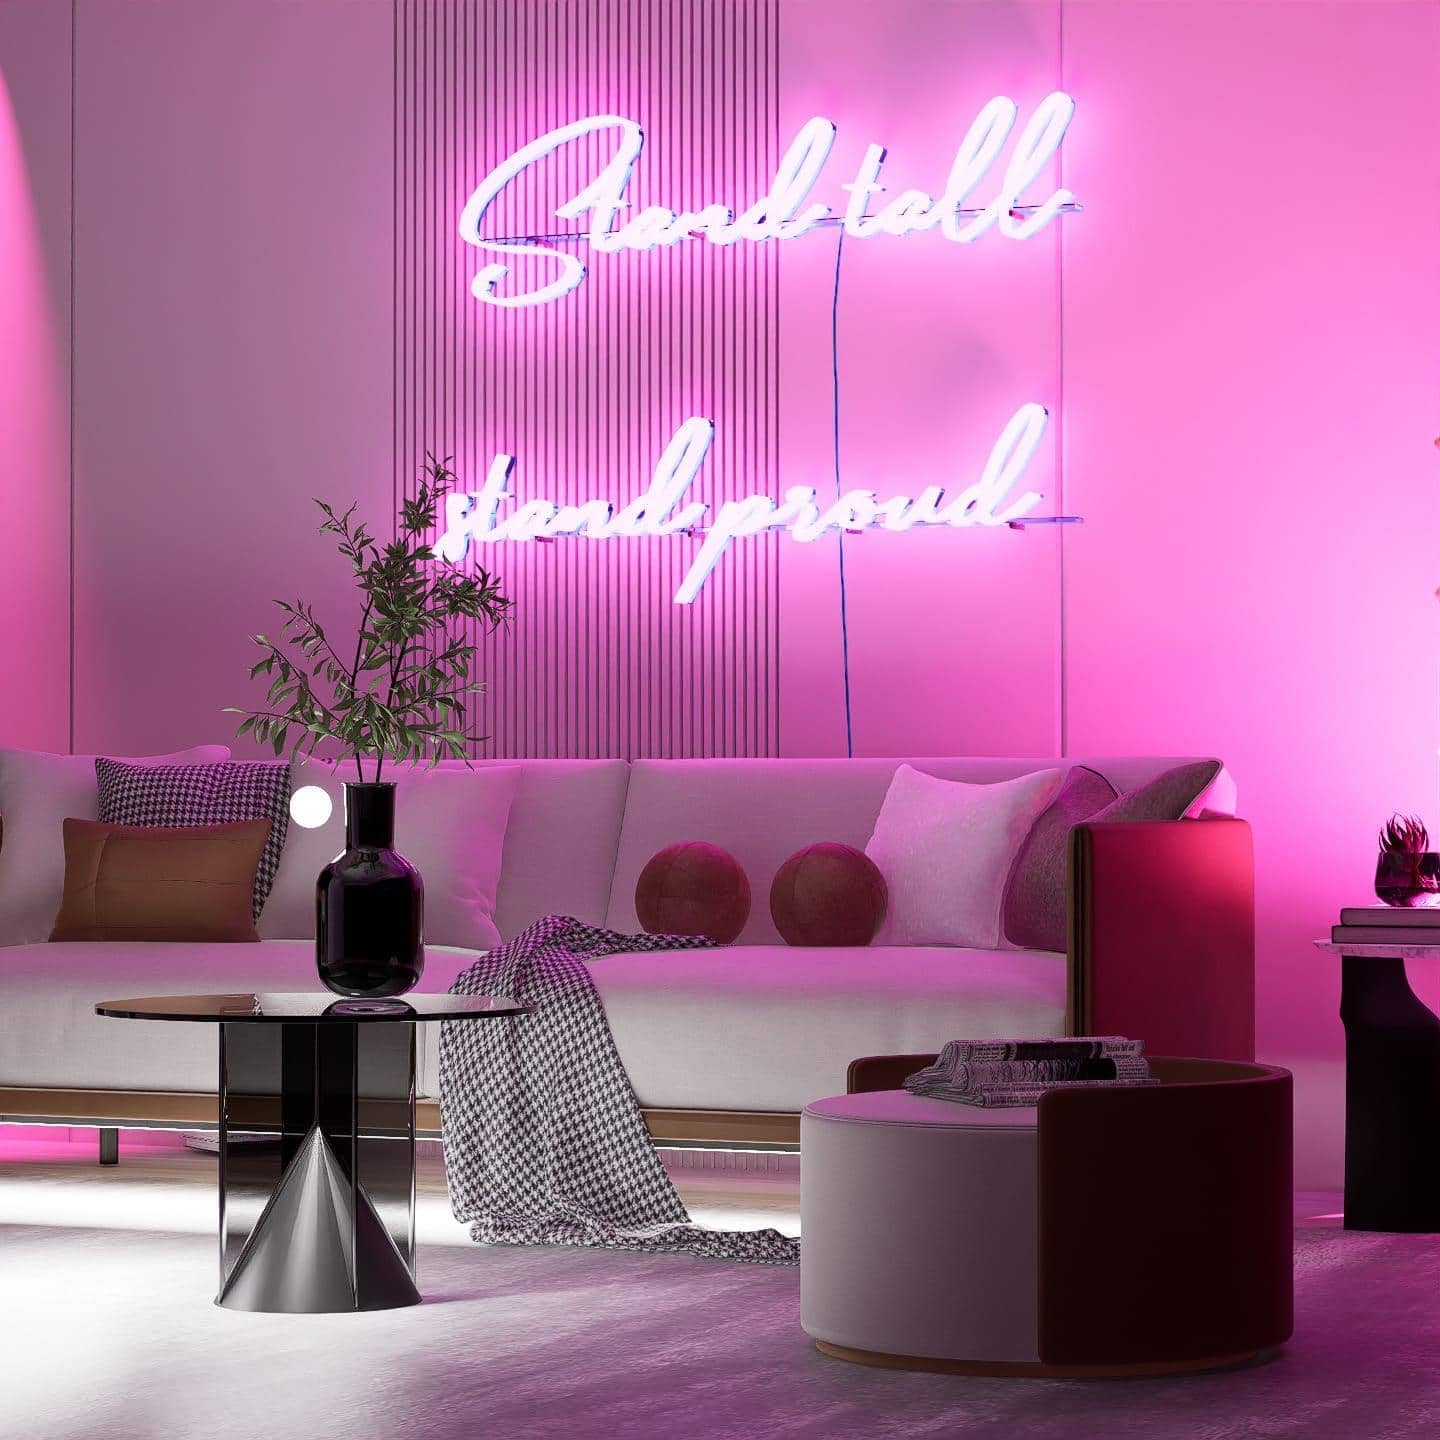 light-up-pink-neon-lights-hanging-on-the-wall-for-display-at-night-stand-tall,-stand-proud